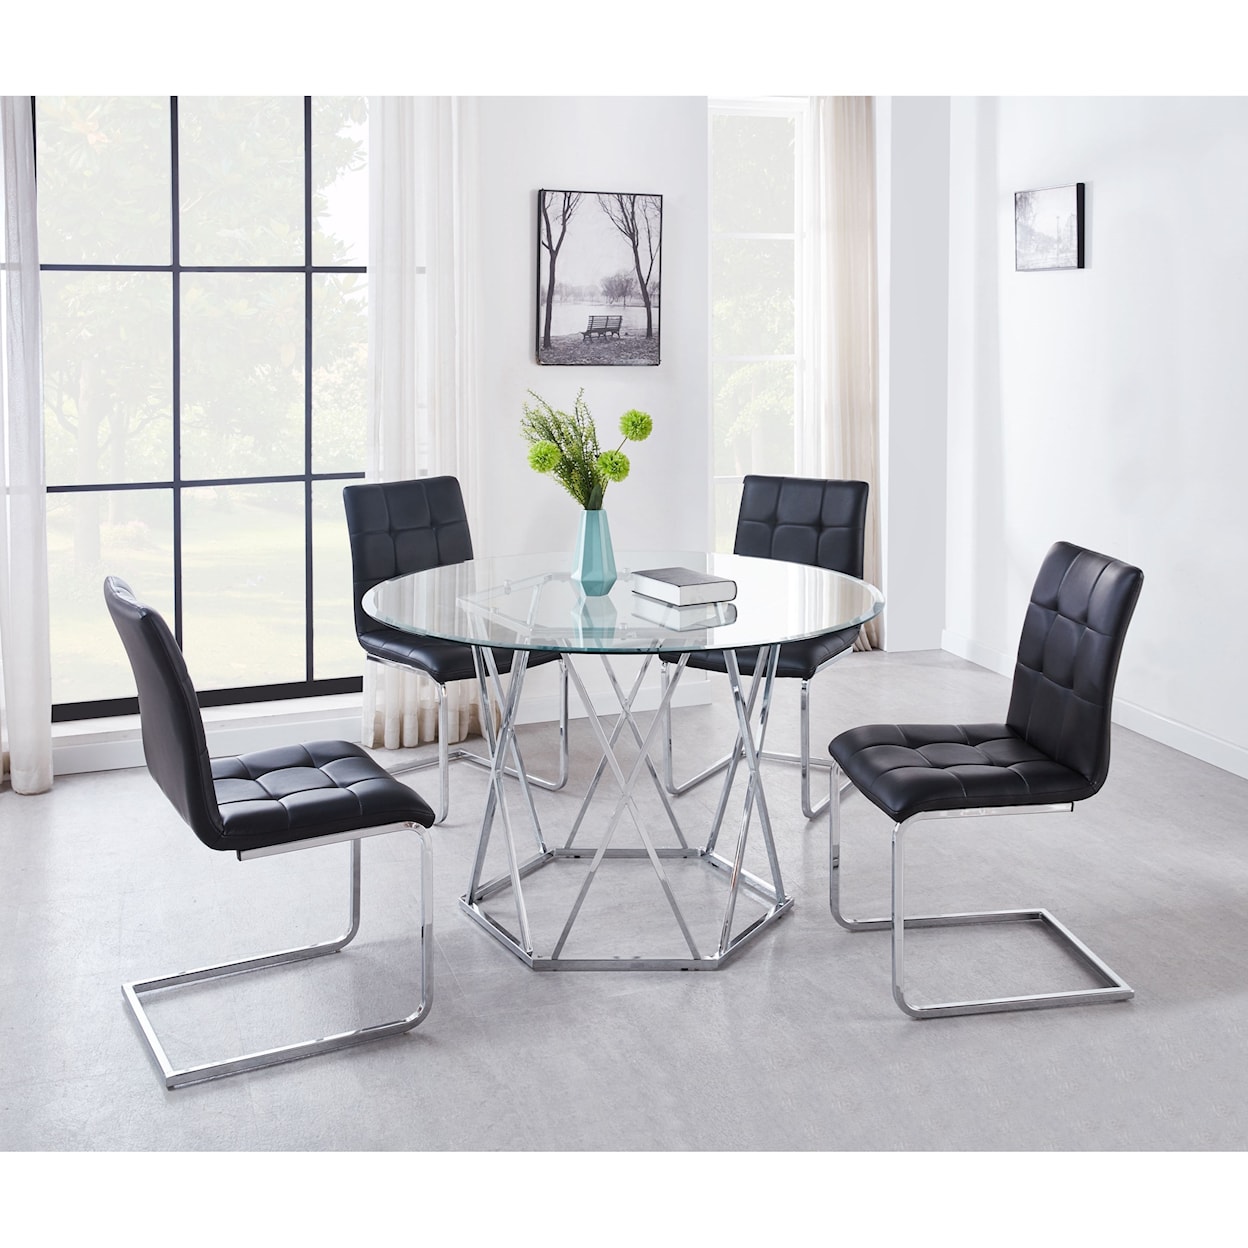 Steve Silver Escondido Black 5-Piece Table and Chair Set